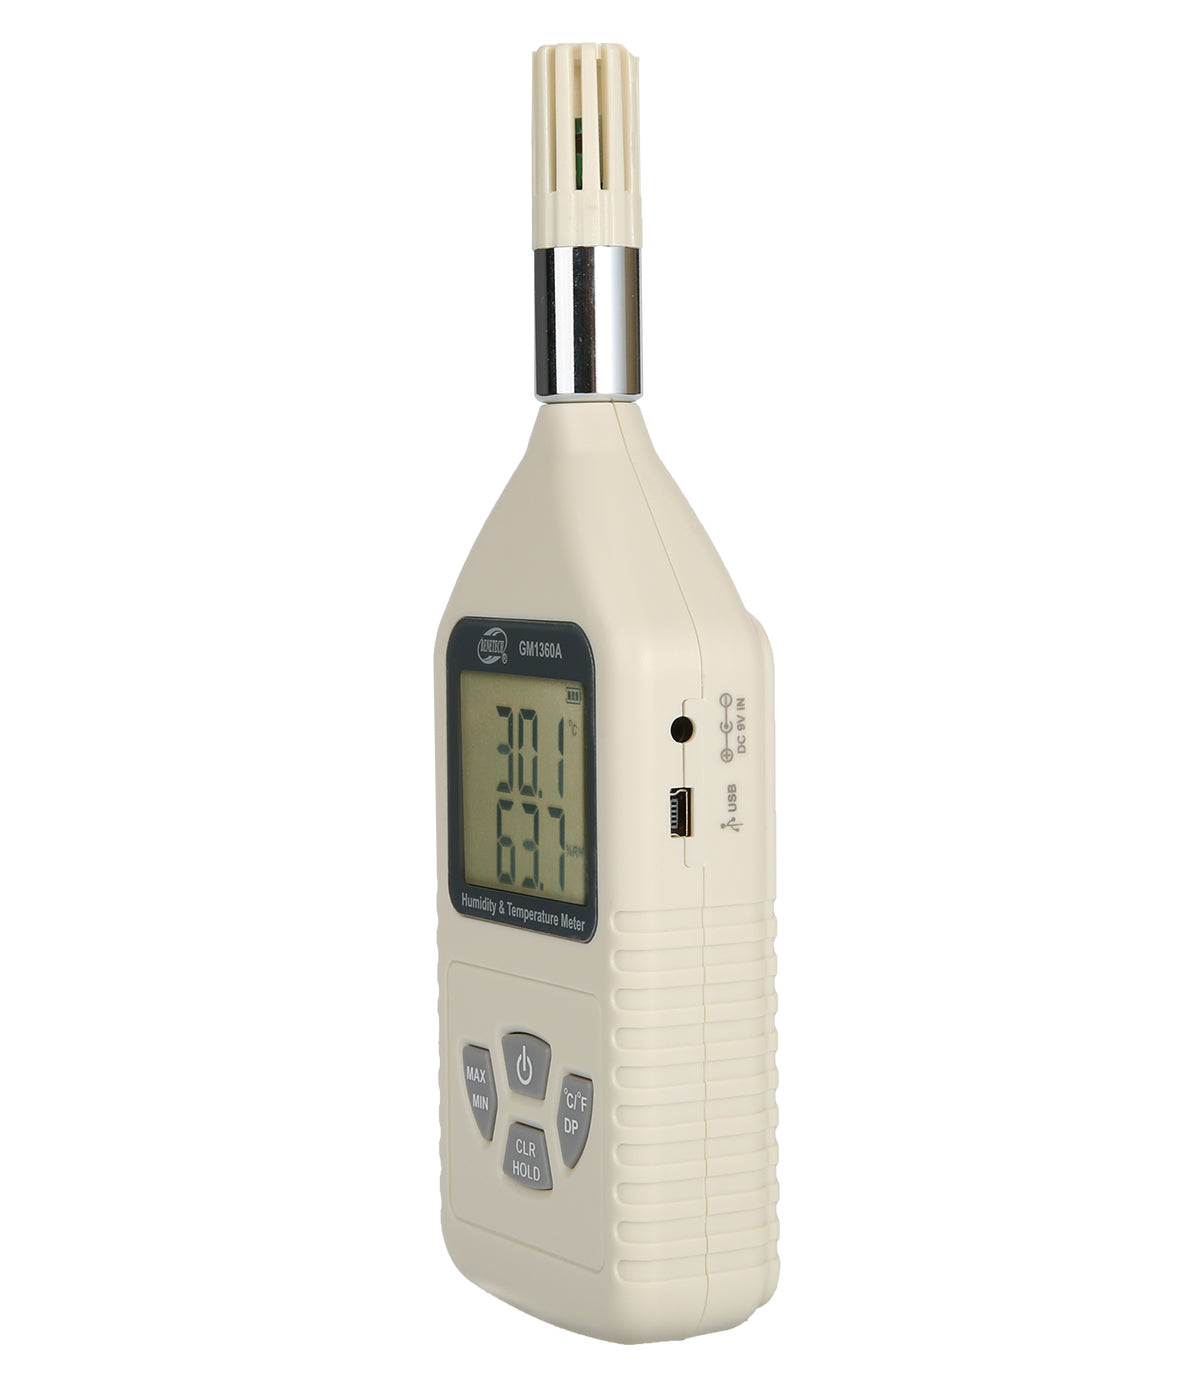 Benetech GM1360A Industrial Humidity & Temperature Meter Humidity Thermometer